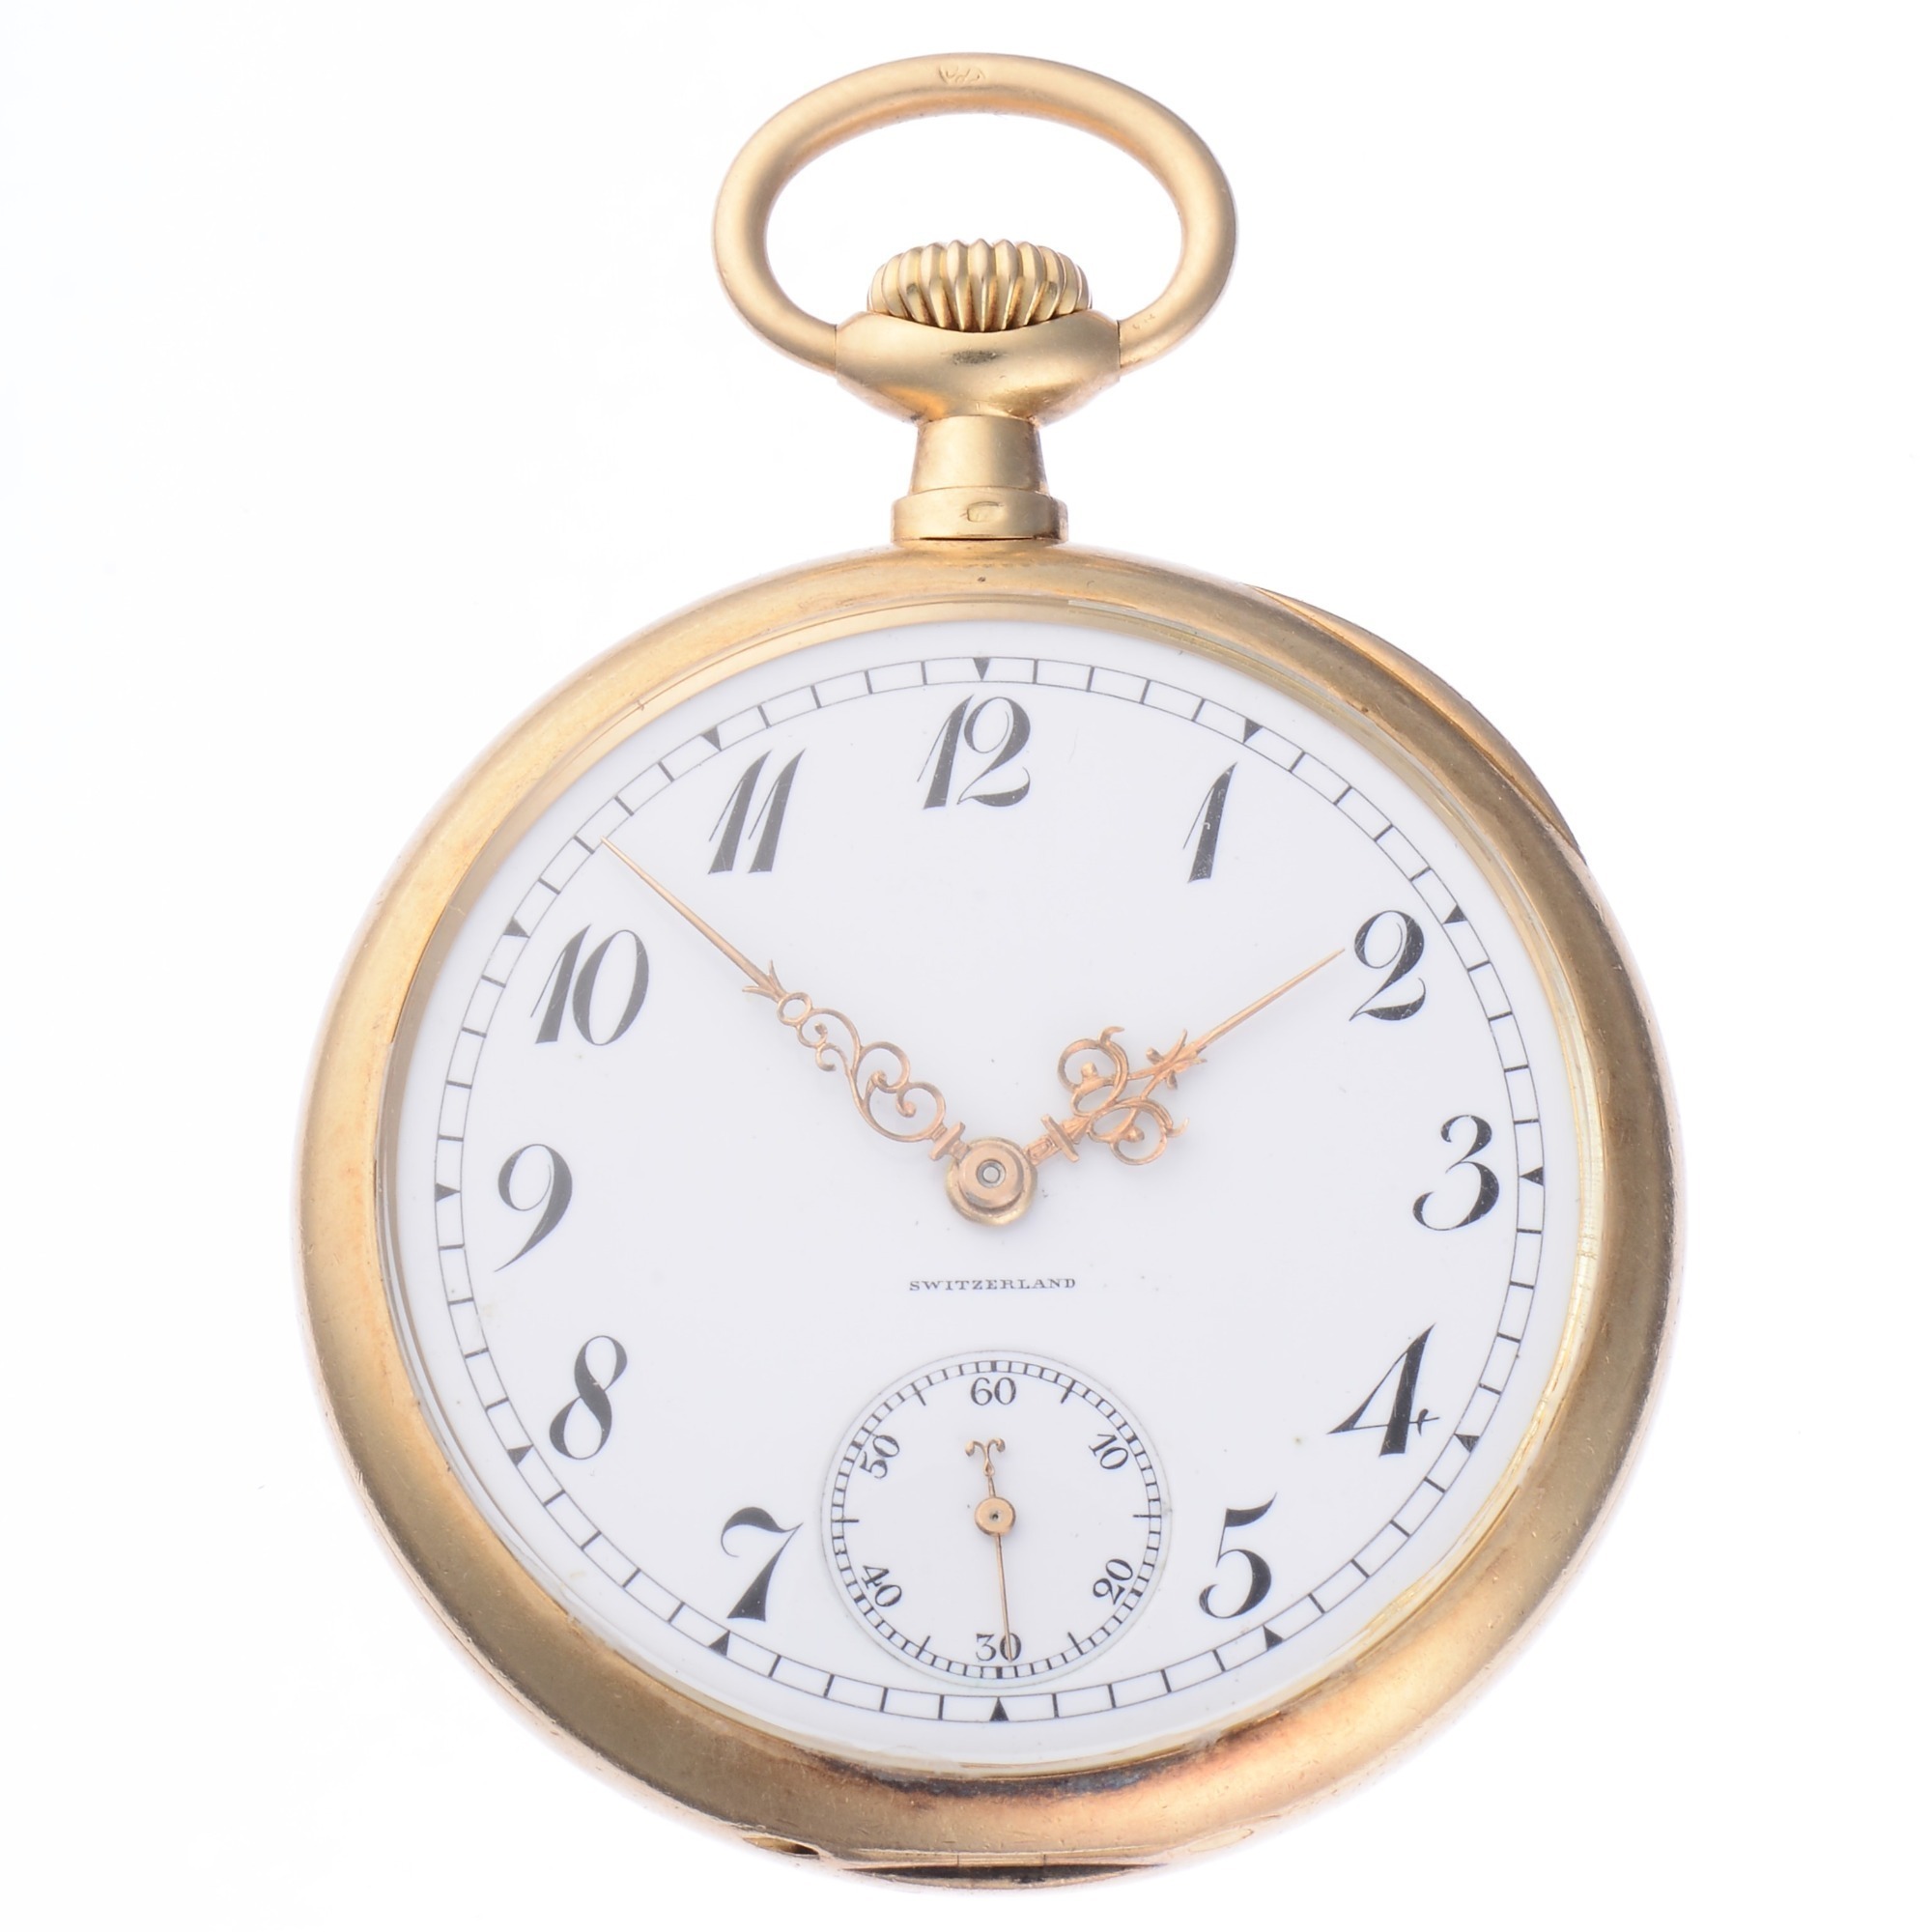 Patek Philippe for Spaulding and Co. 18K Gold 20 Jewel Pocket Watch